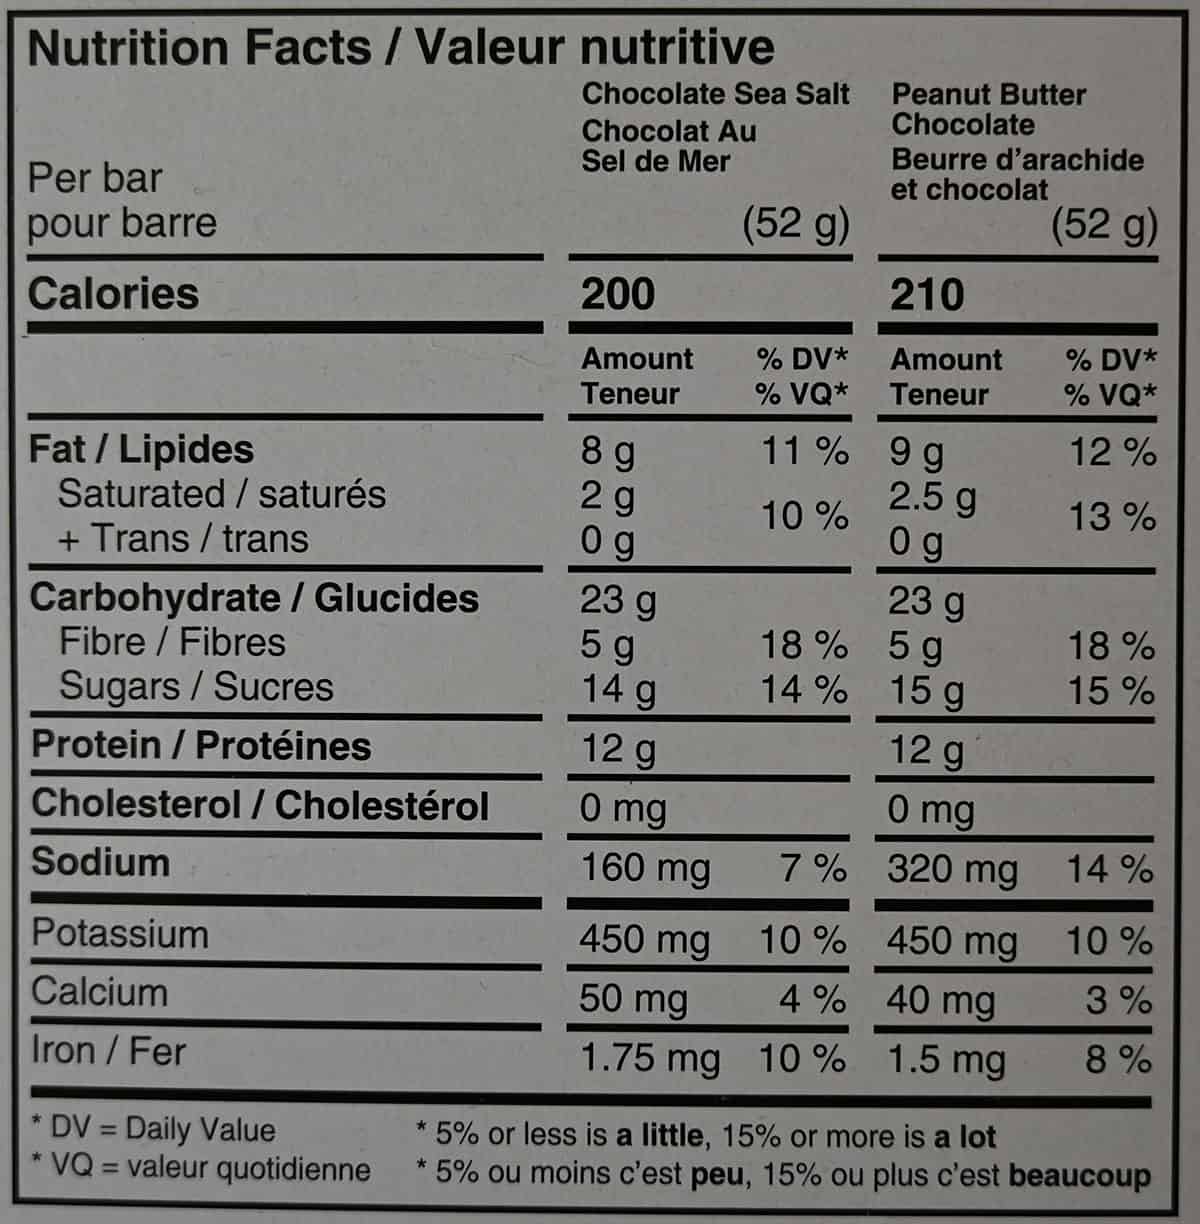 Nutrition facts for the two flavors of protein bars, chocolate sea salt and peanut butter chocolate, image from back of box.